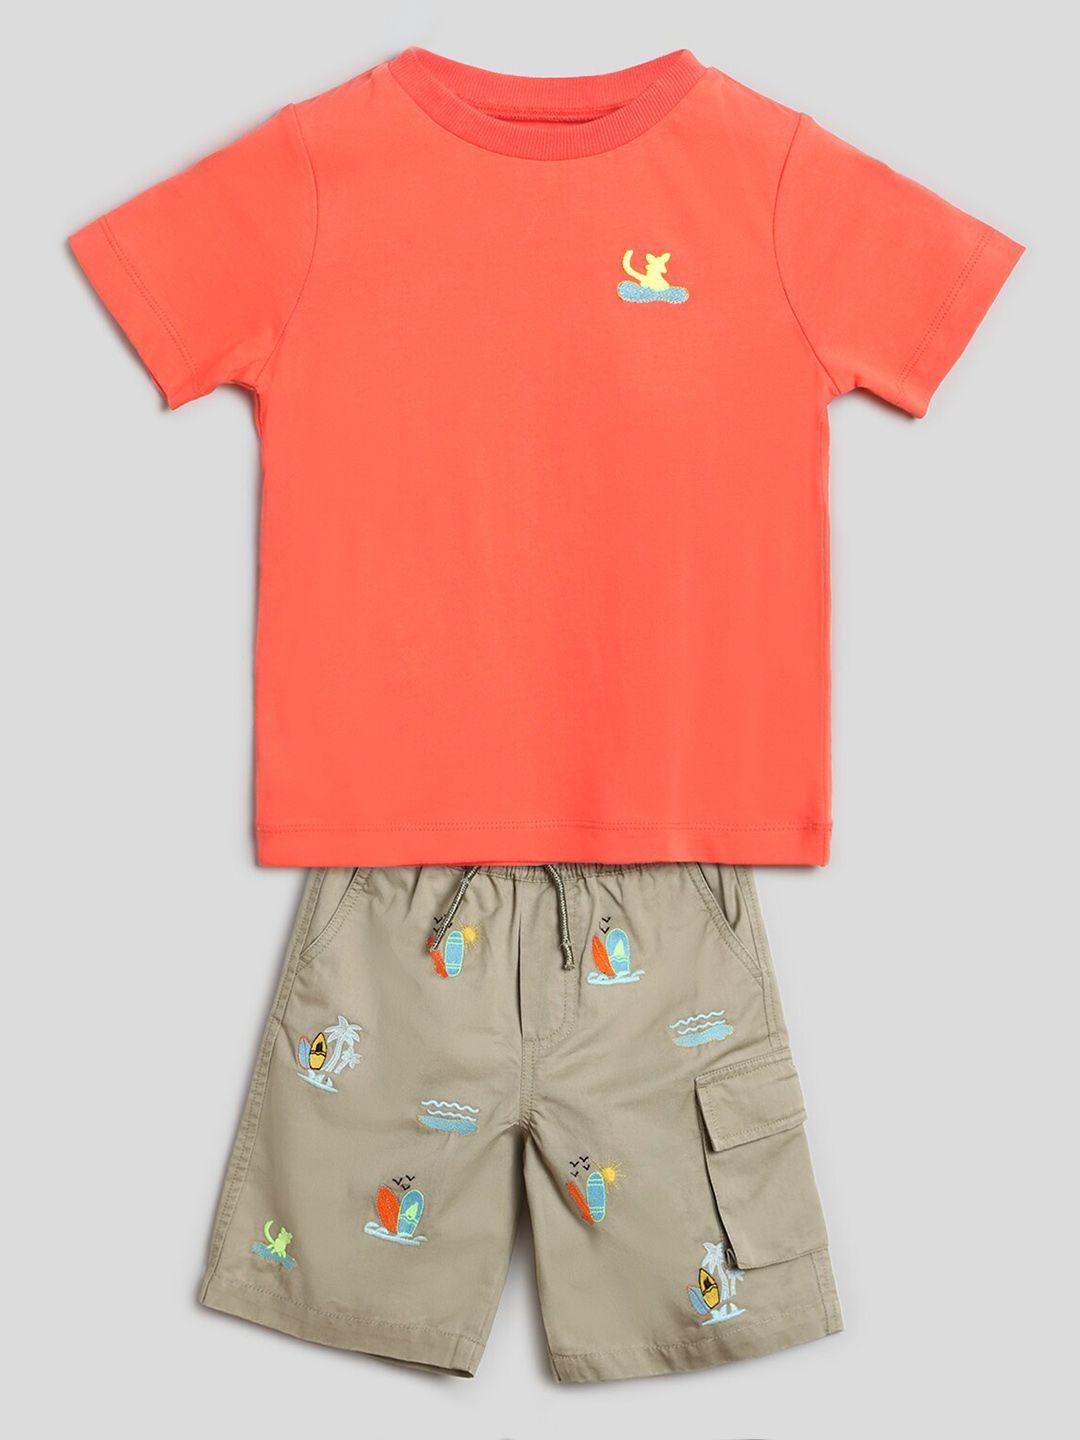 somersault boys t-shirt with shorts